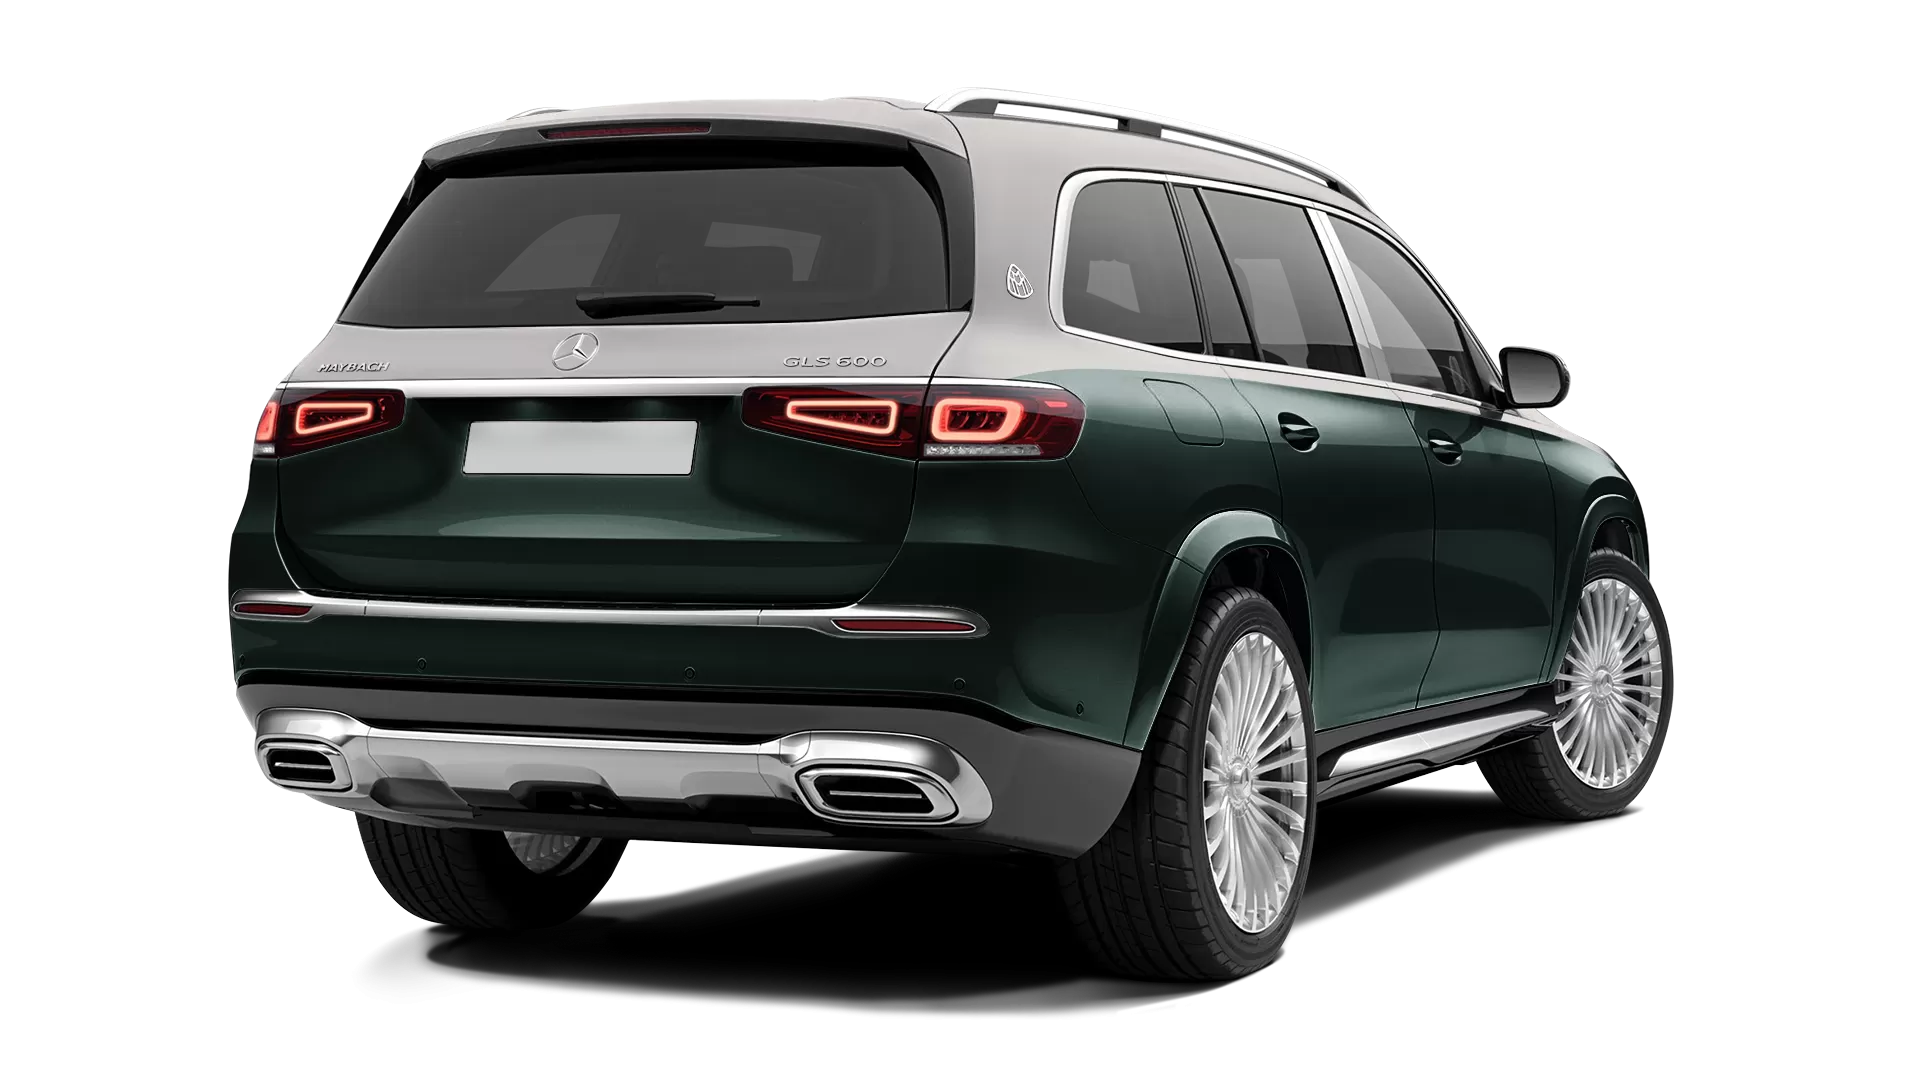 Mercedes Maybach GLS 600 stock rear view in Emerald Green & Mojave Silver color